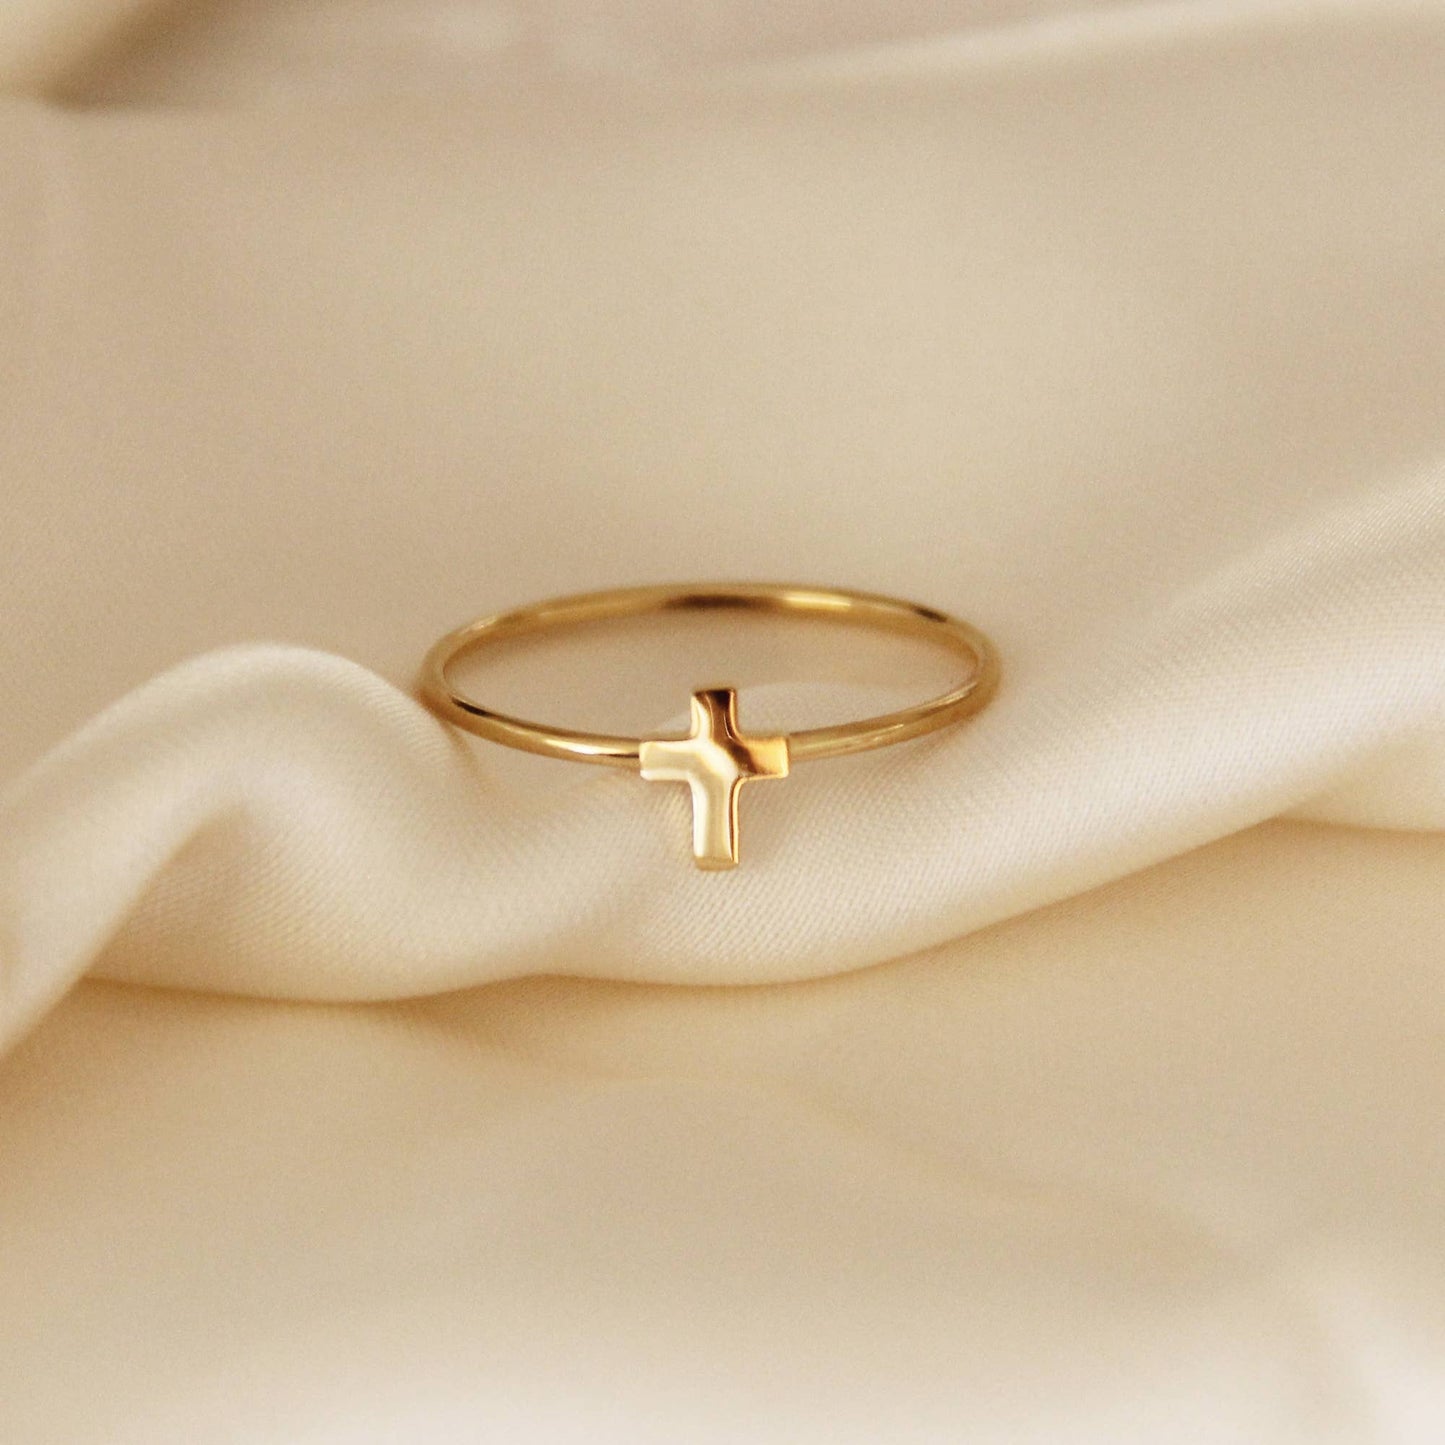 24k Gold Plated Cross Ring